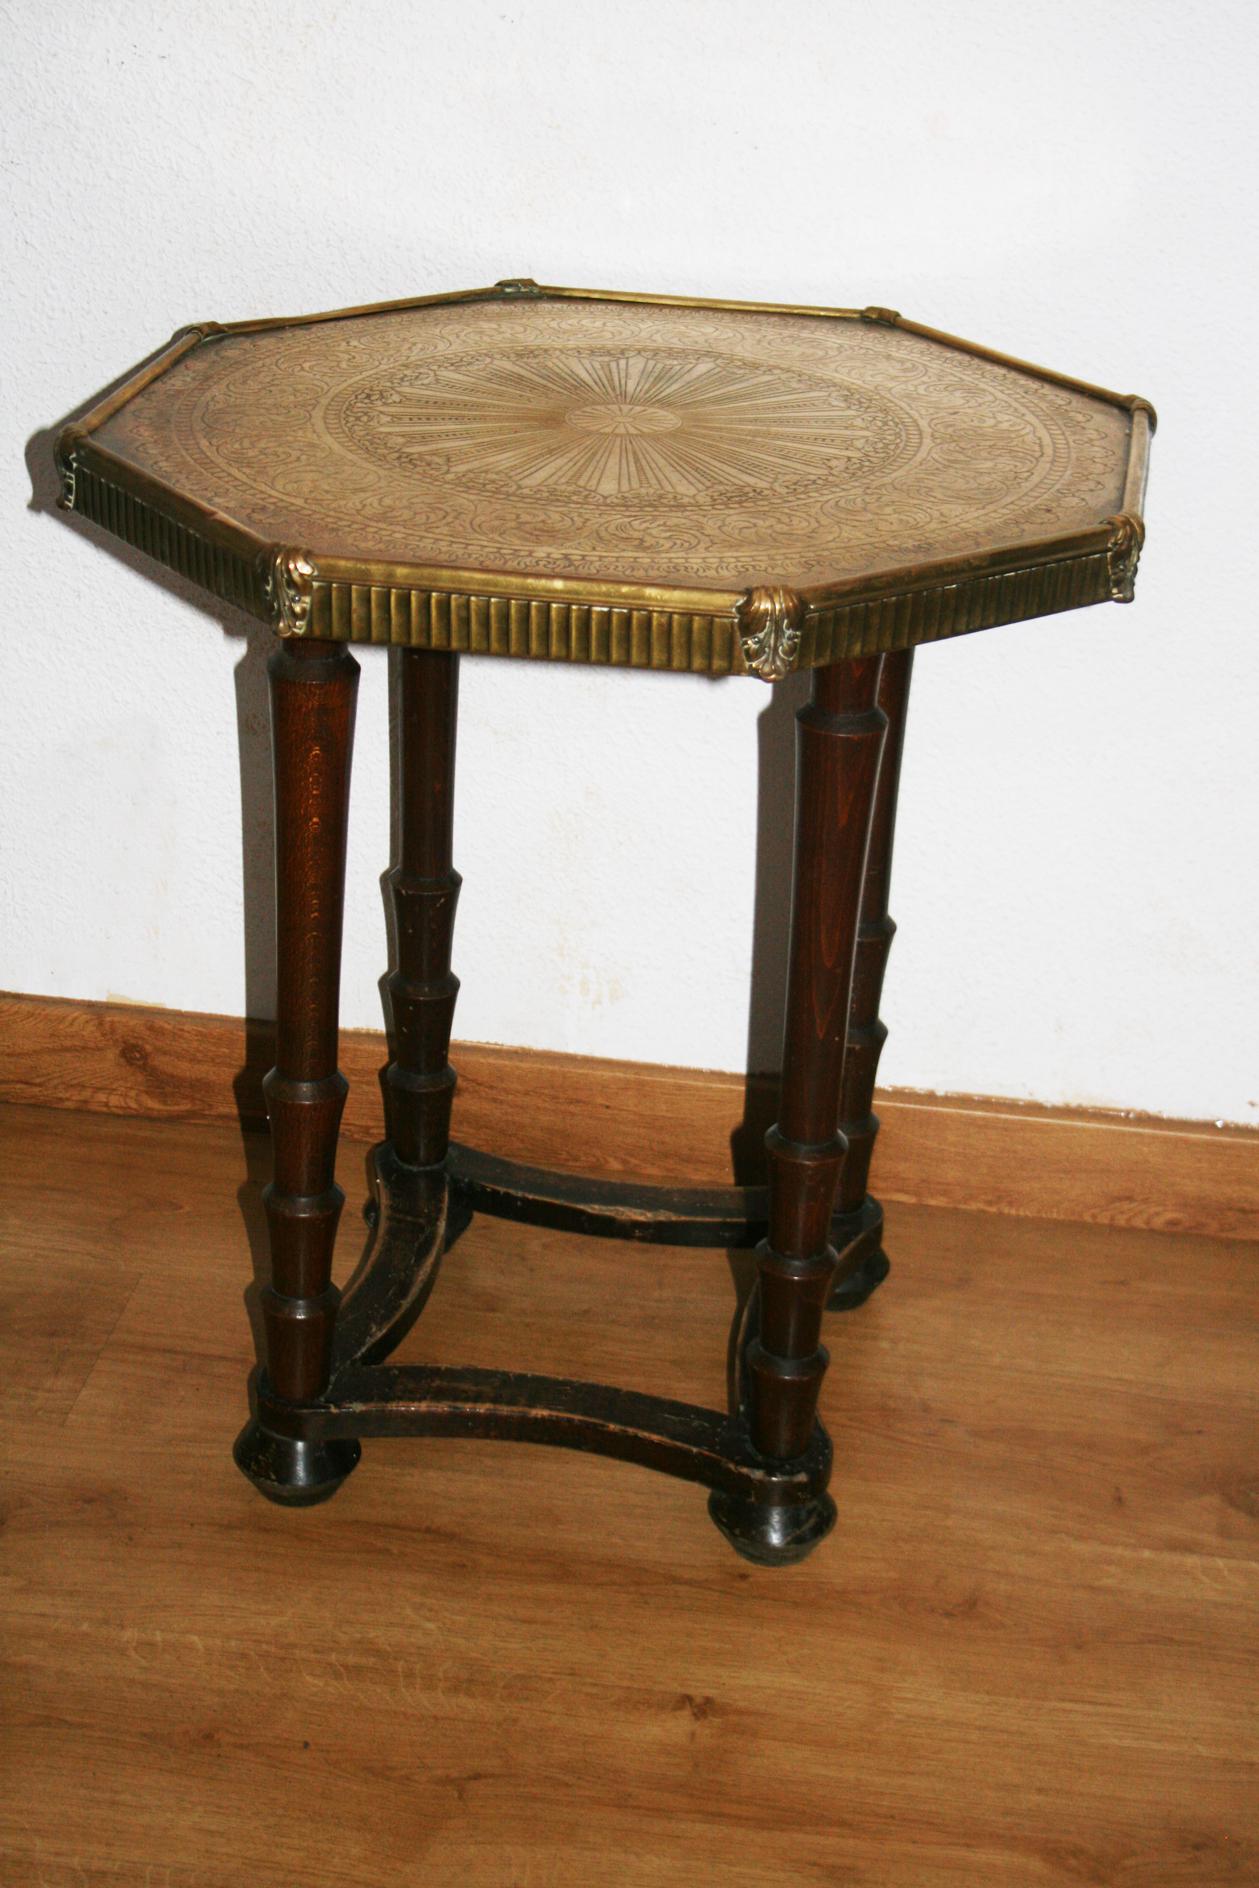 20th Century Side Table Embossed Brass Topu and Wooden Legs, England